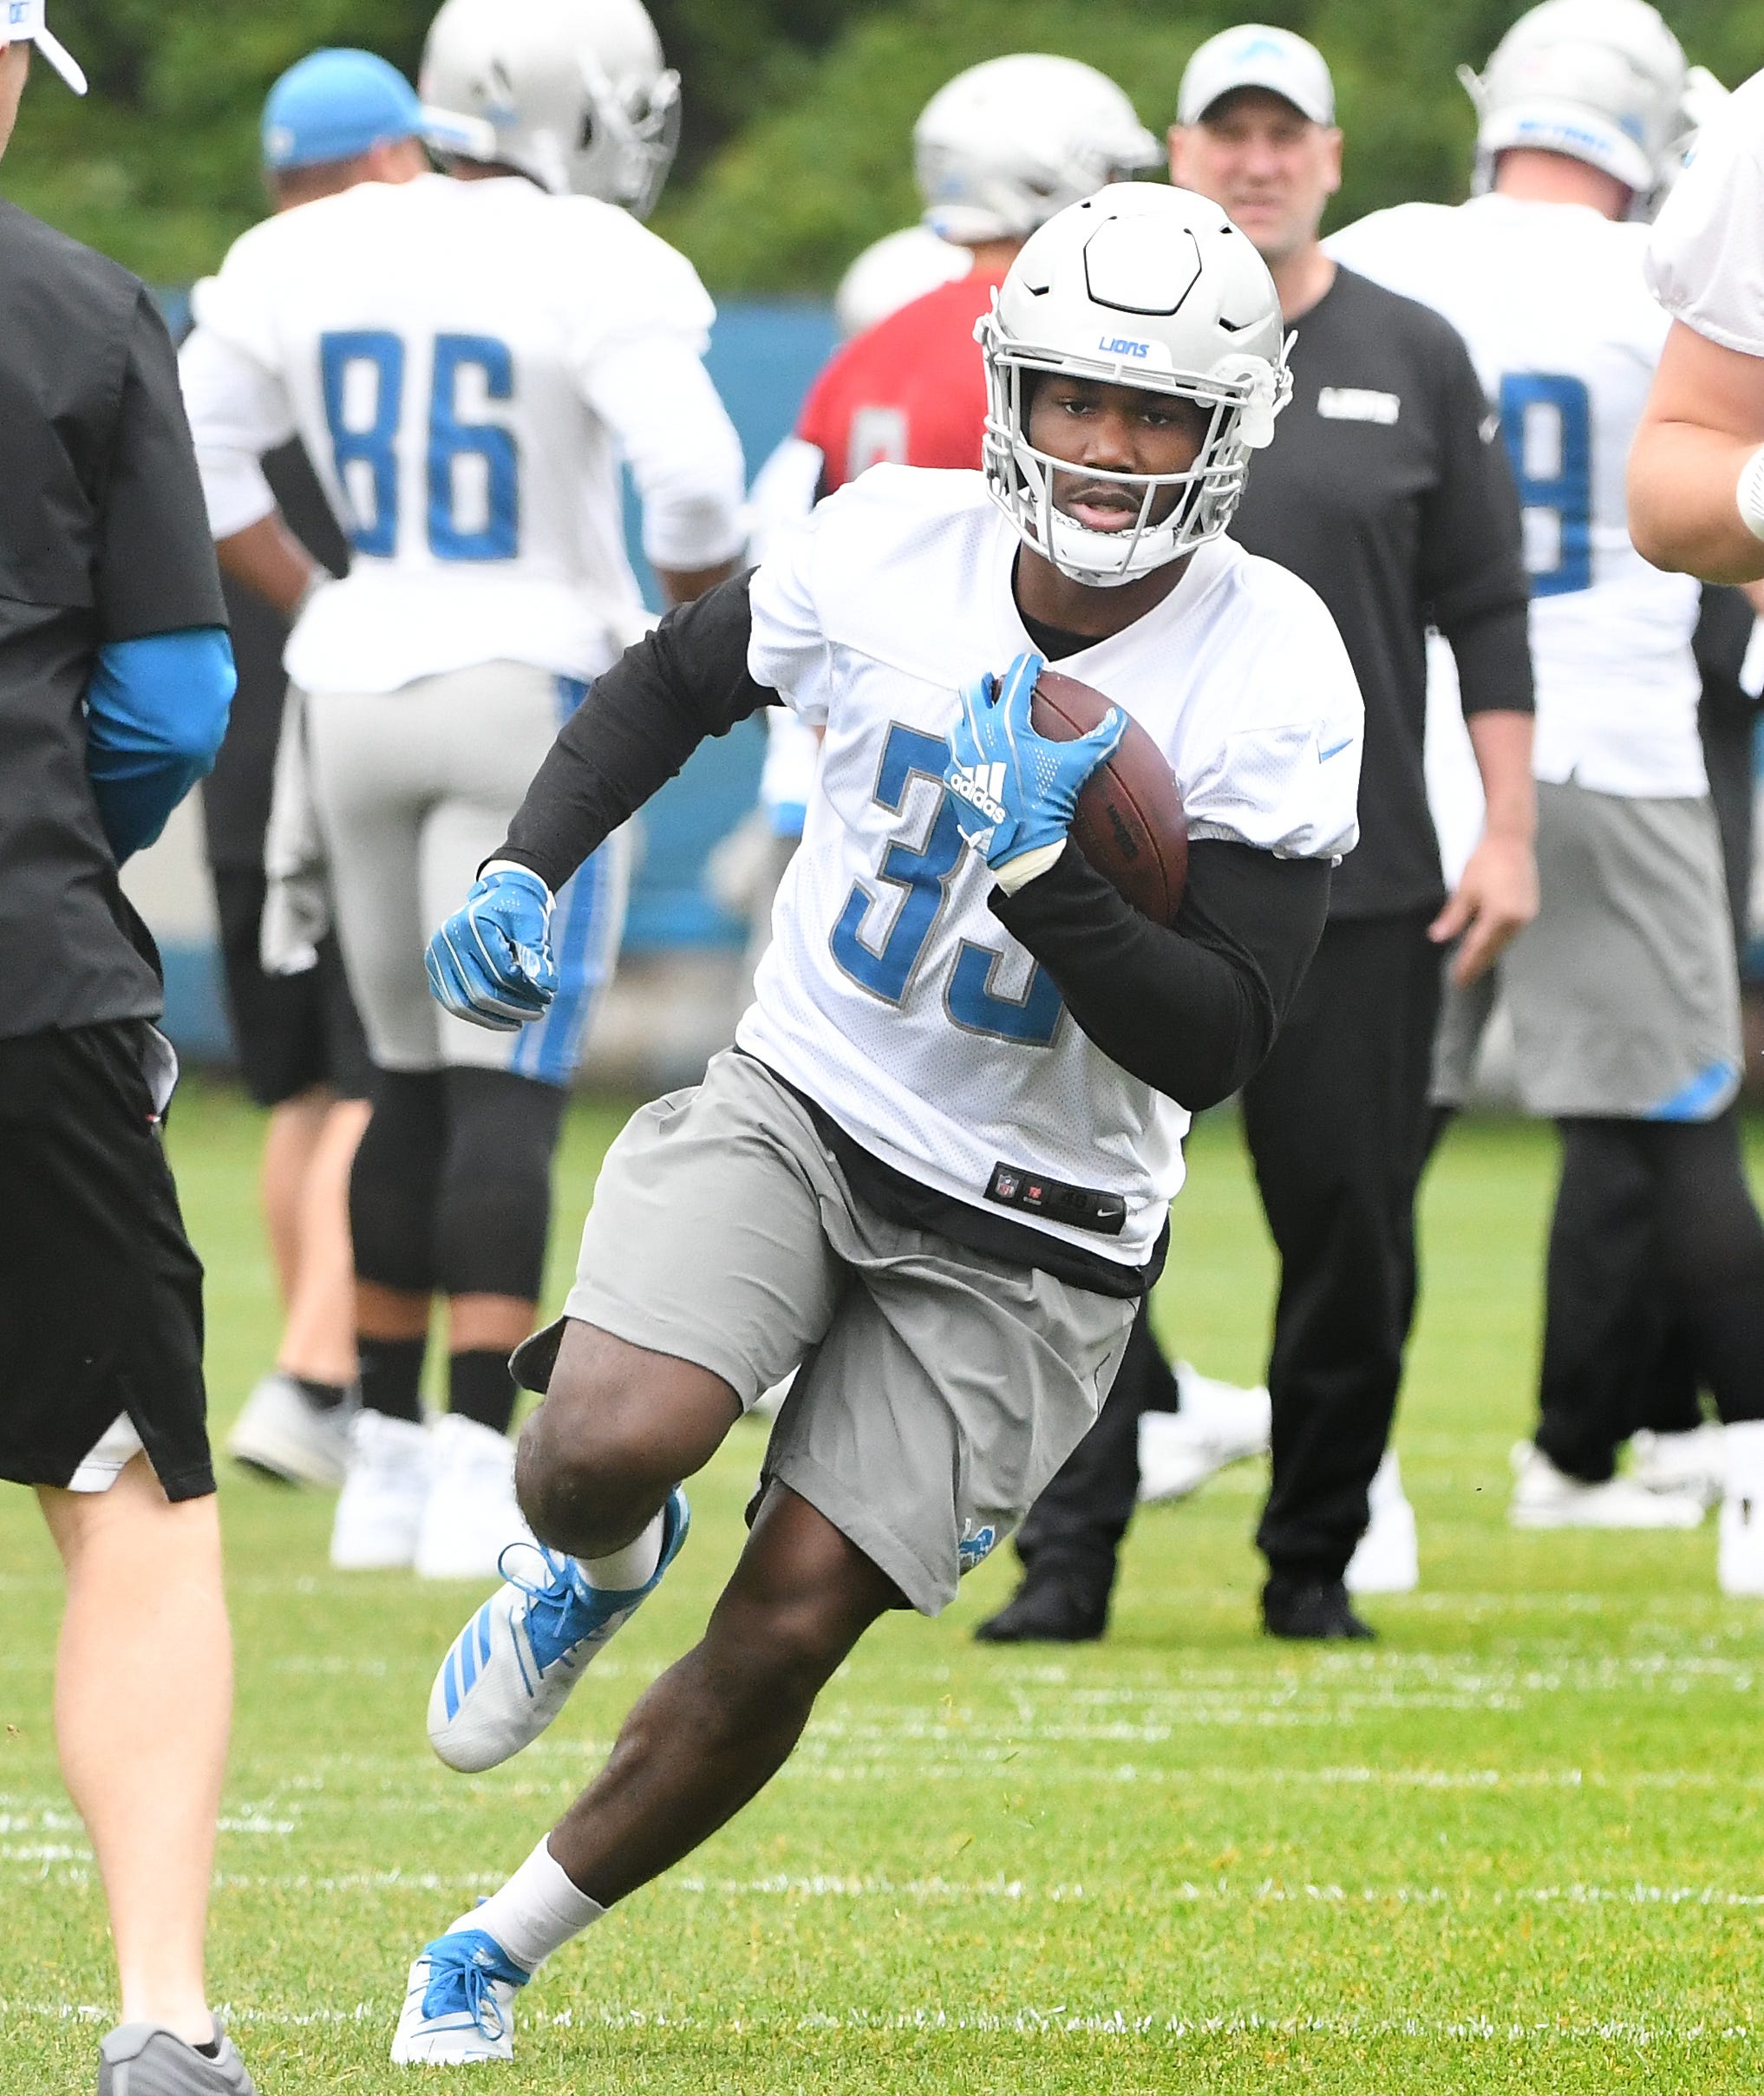 Lions running back Kerryon Johnson cuts up field during drills.